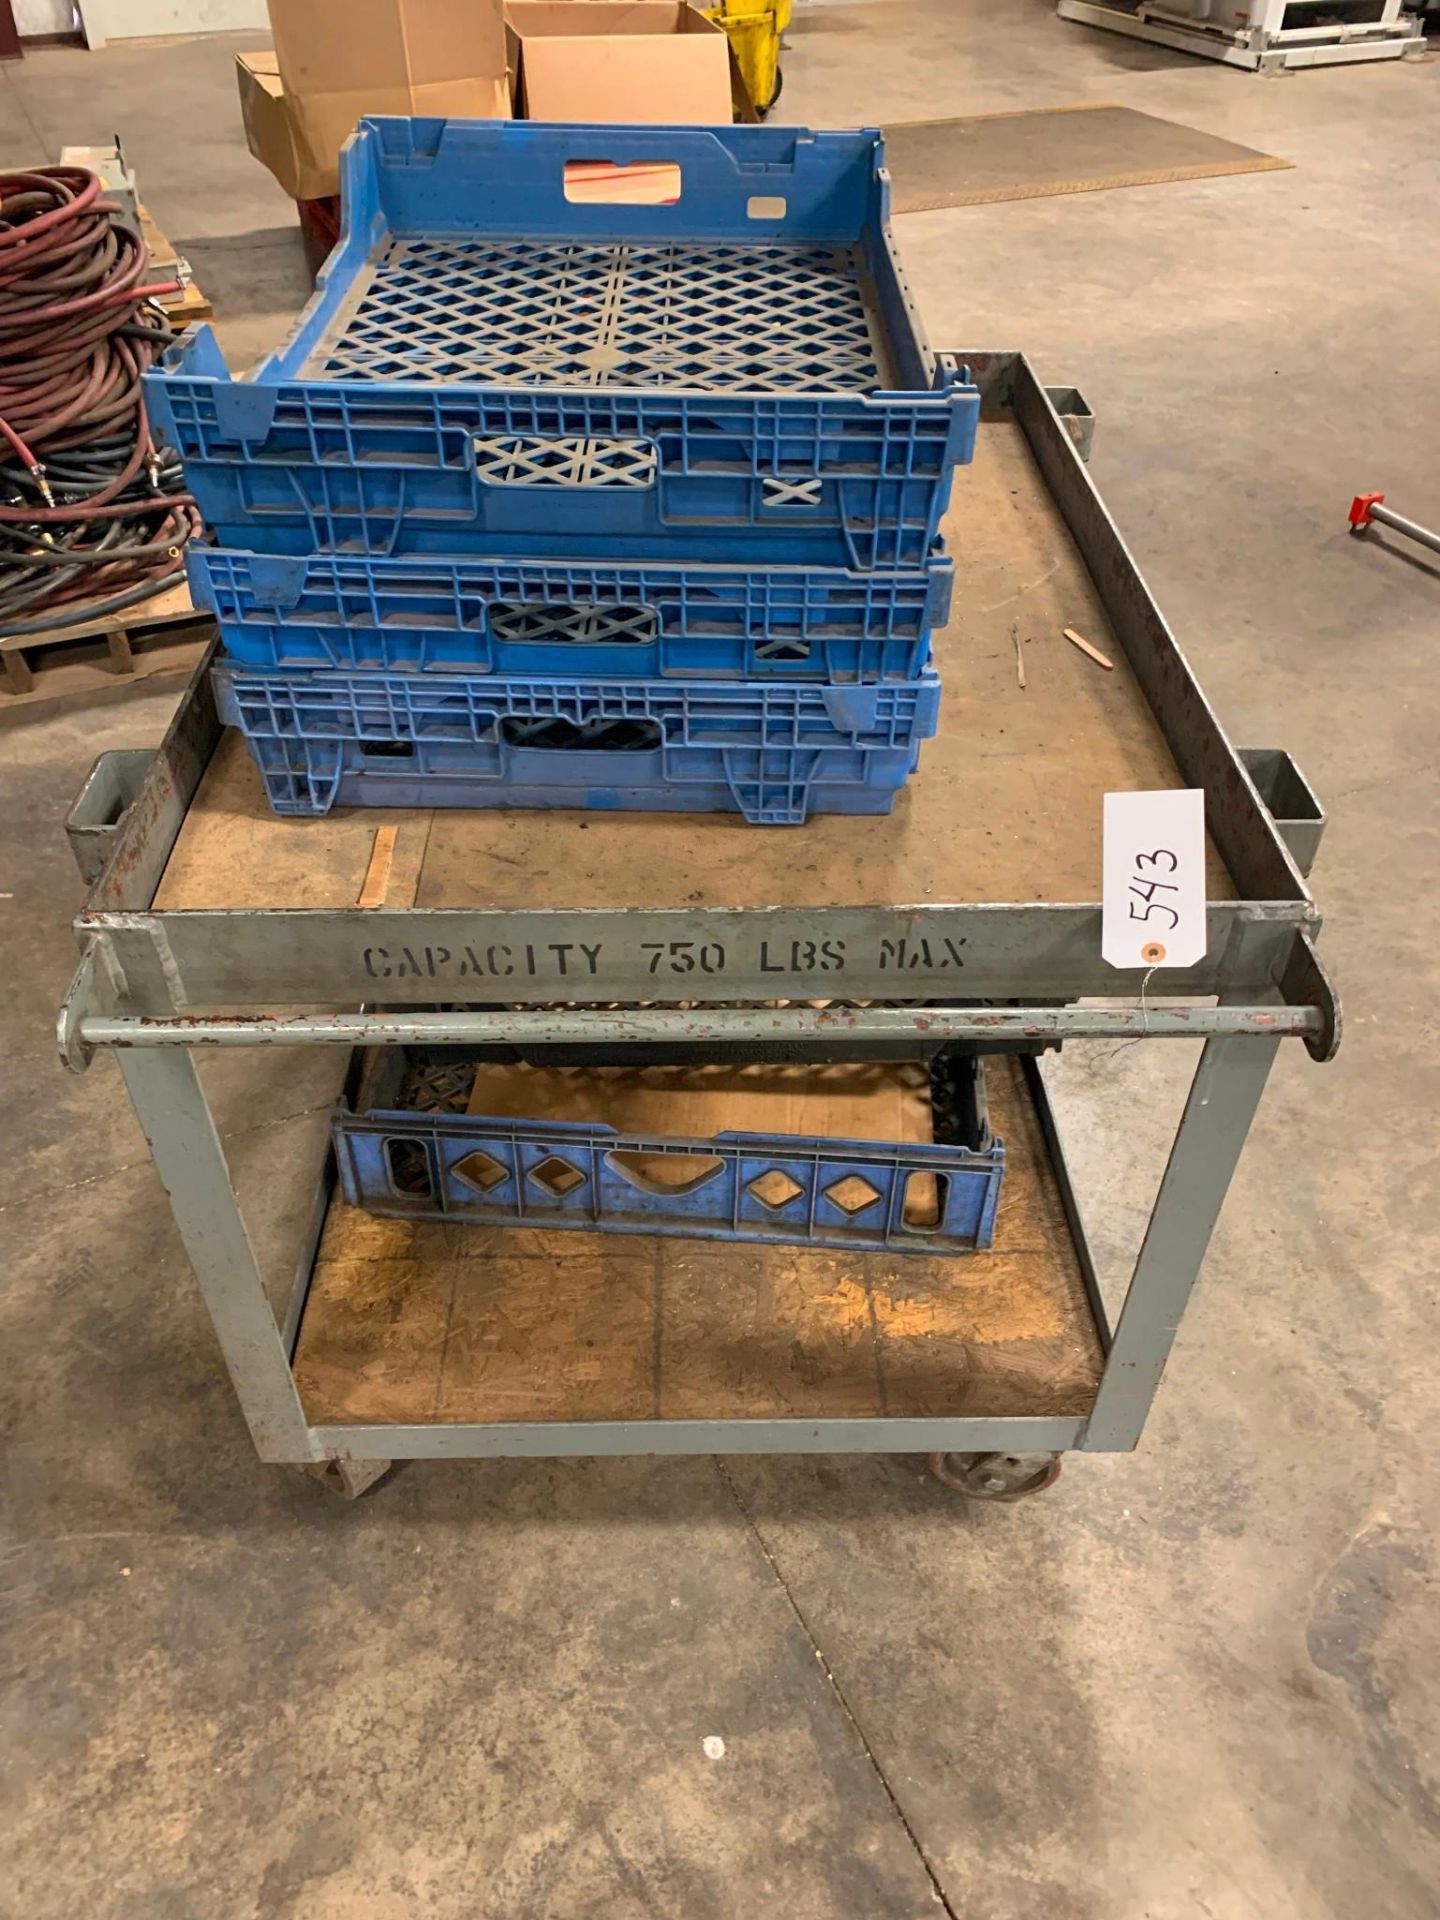 STEEL CART WITH PARTS BASKETS